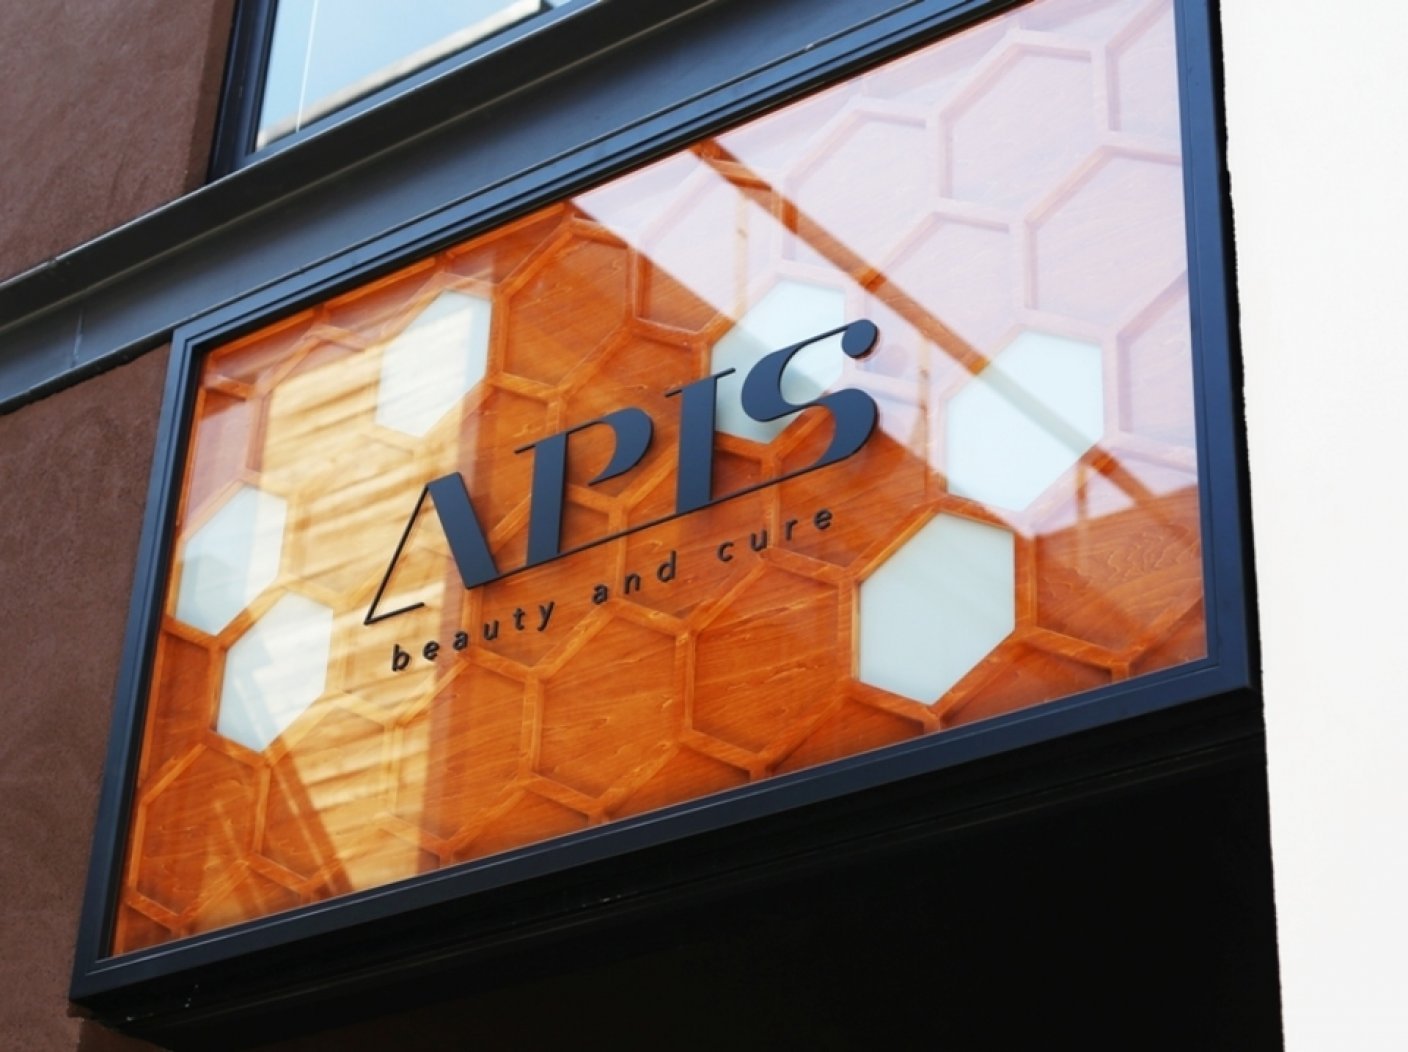 APIS beauty and cure 神宮前店の写真 7